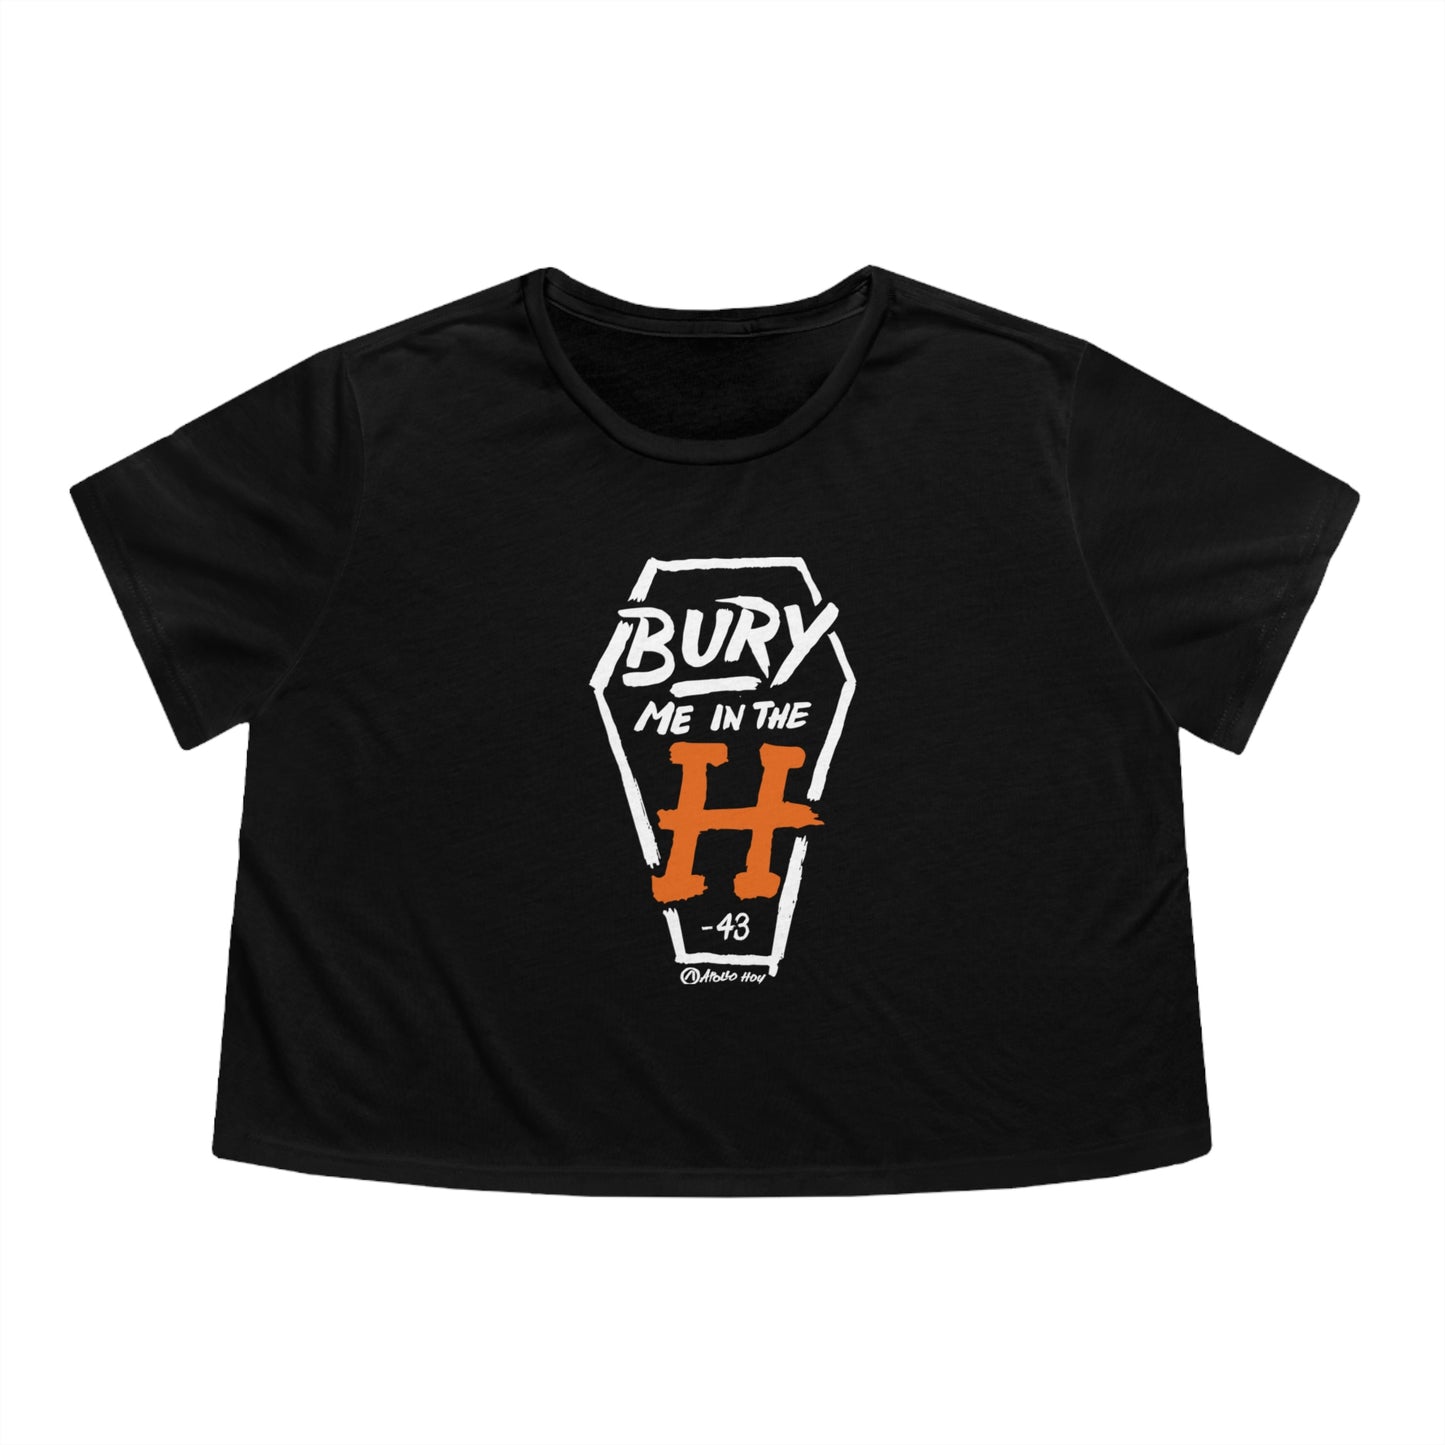 Bury Me In The H (Coffin Variant) Cropped Tee